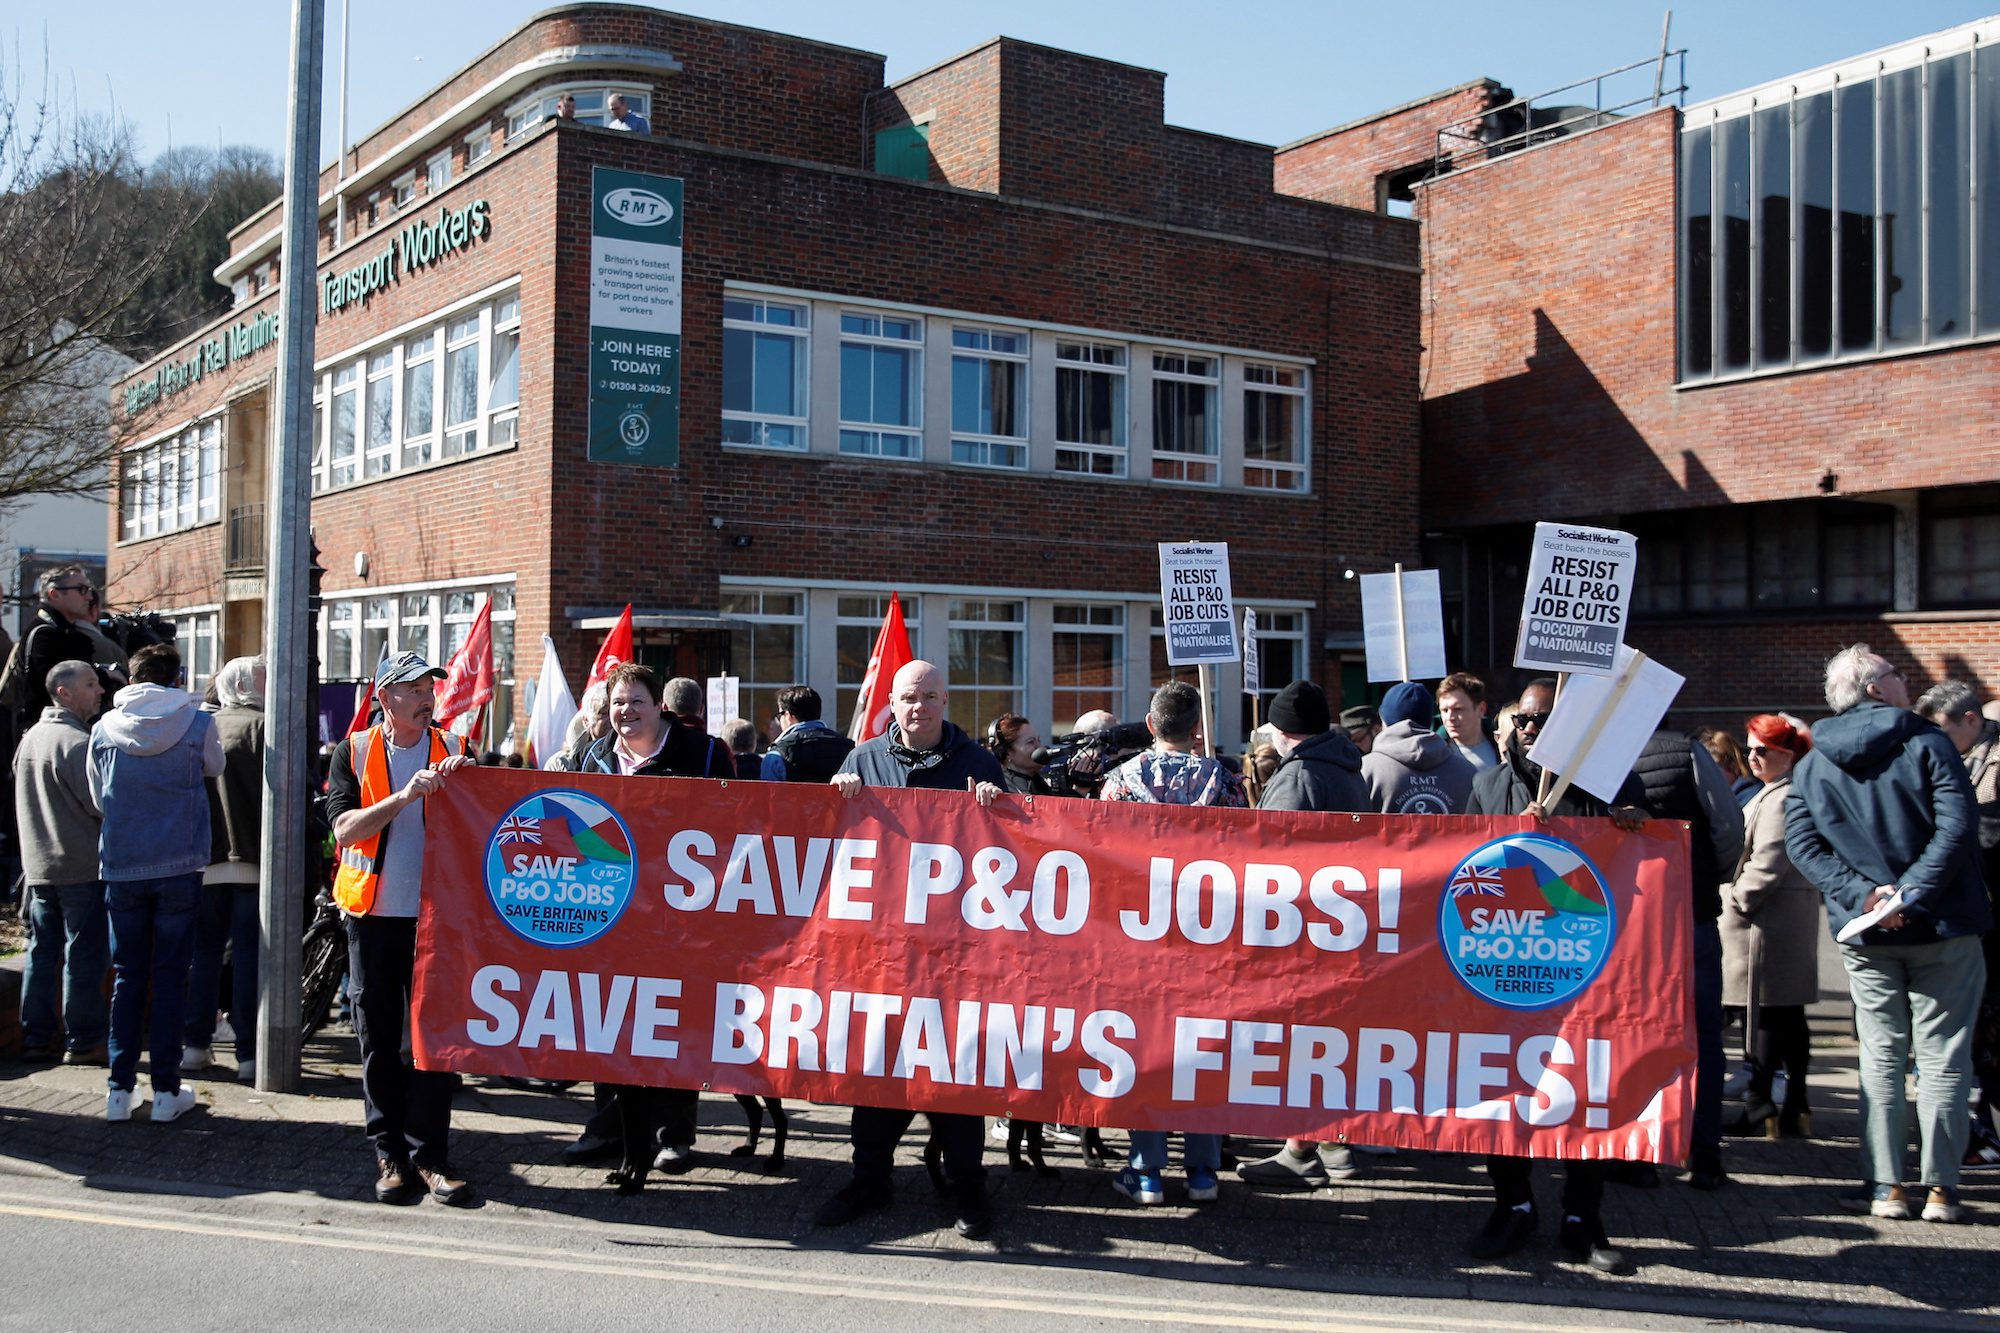 Protesters Gather at UK Ports After P&O Sacks Ferry Crews